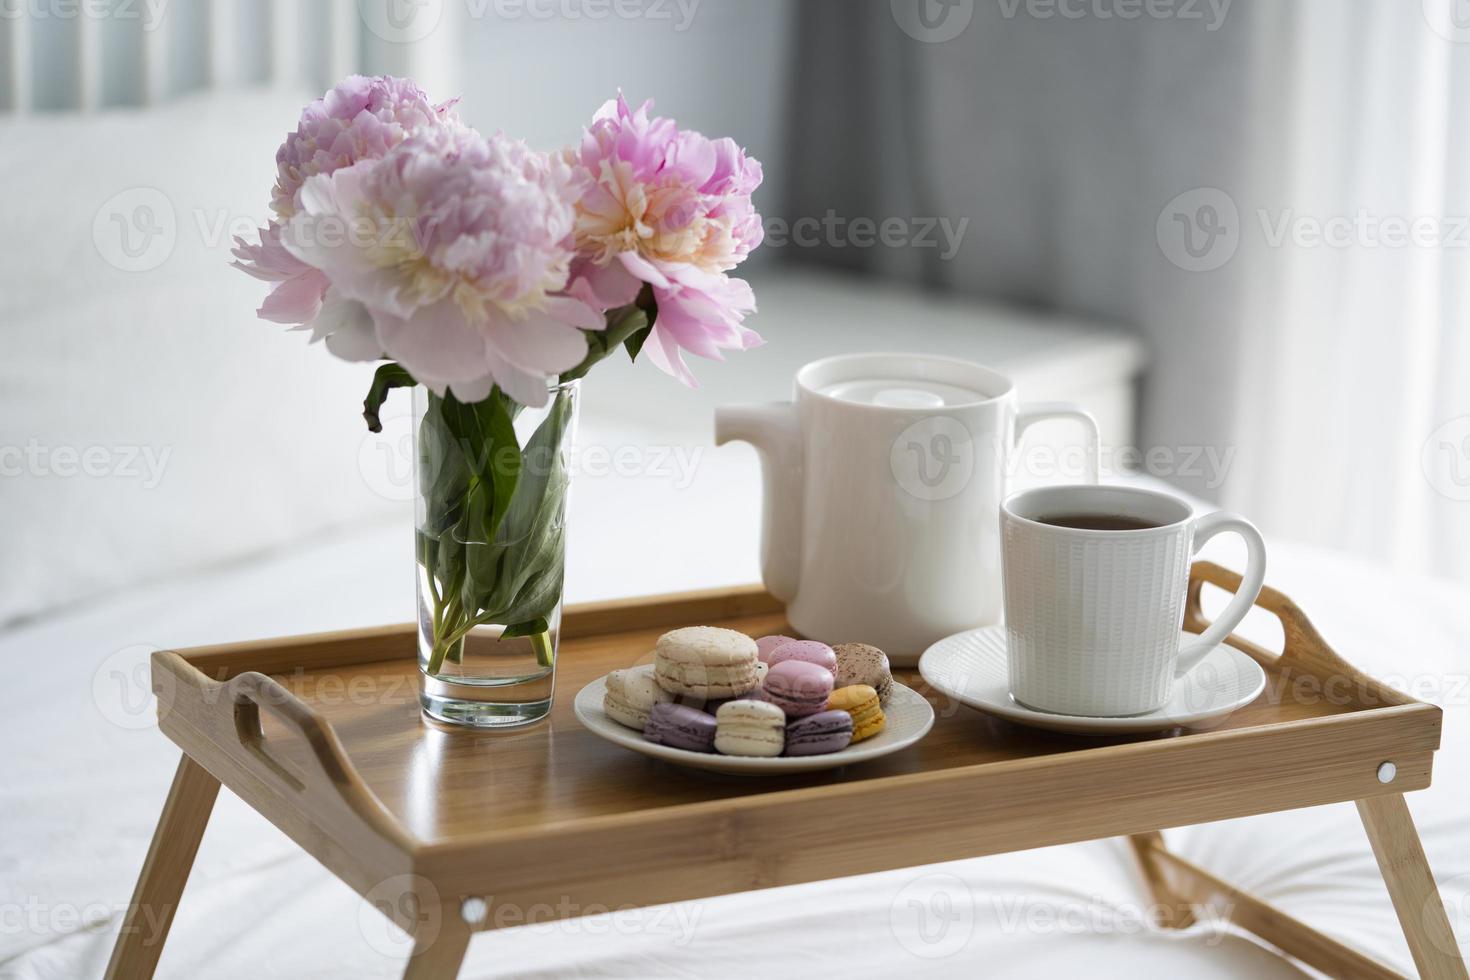 Tray with breakfast on bed. photo